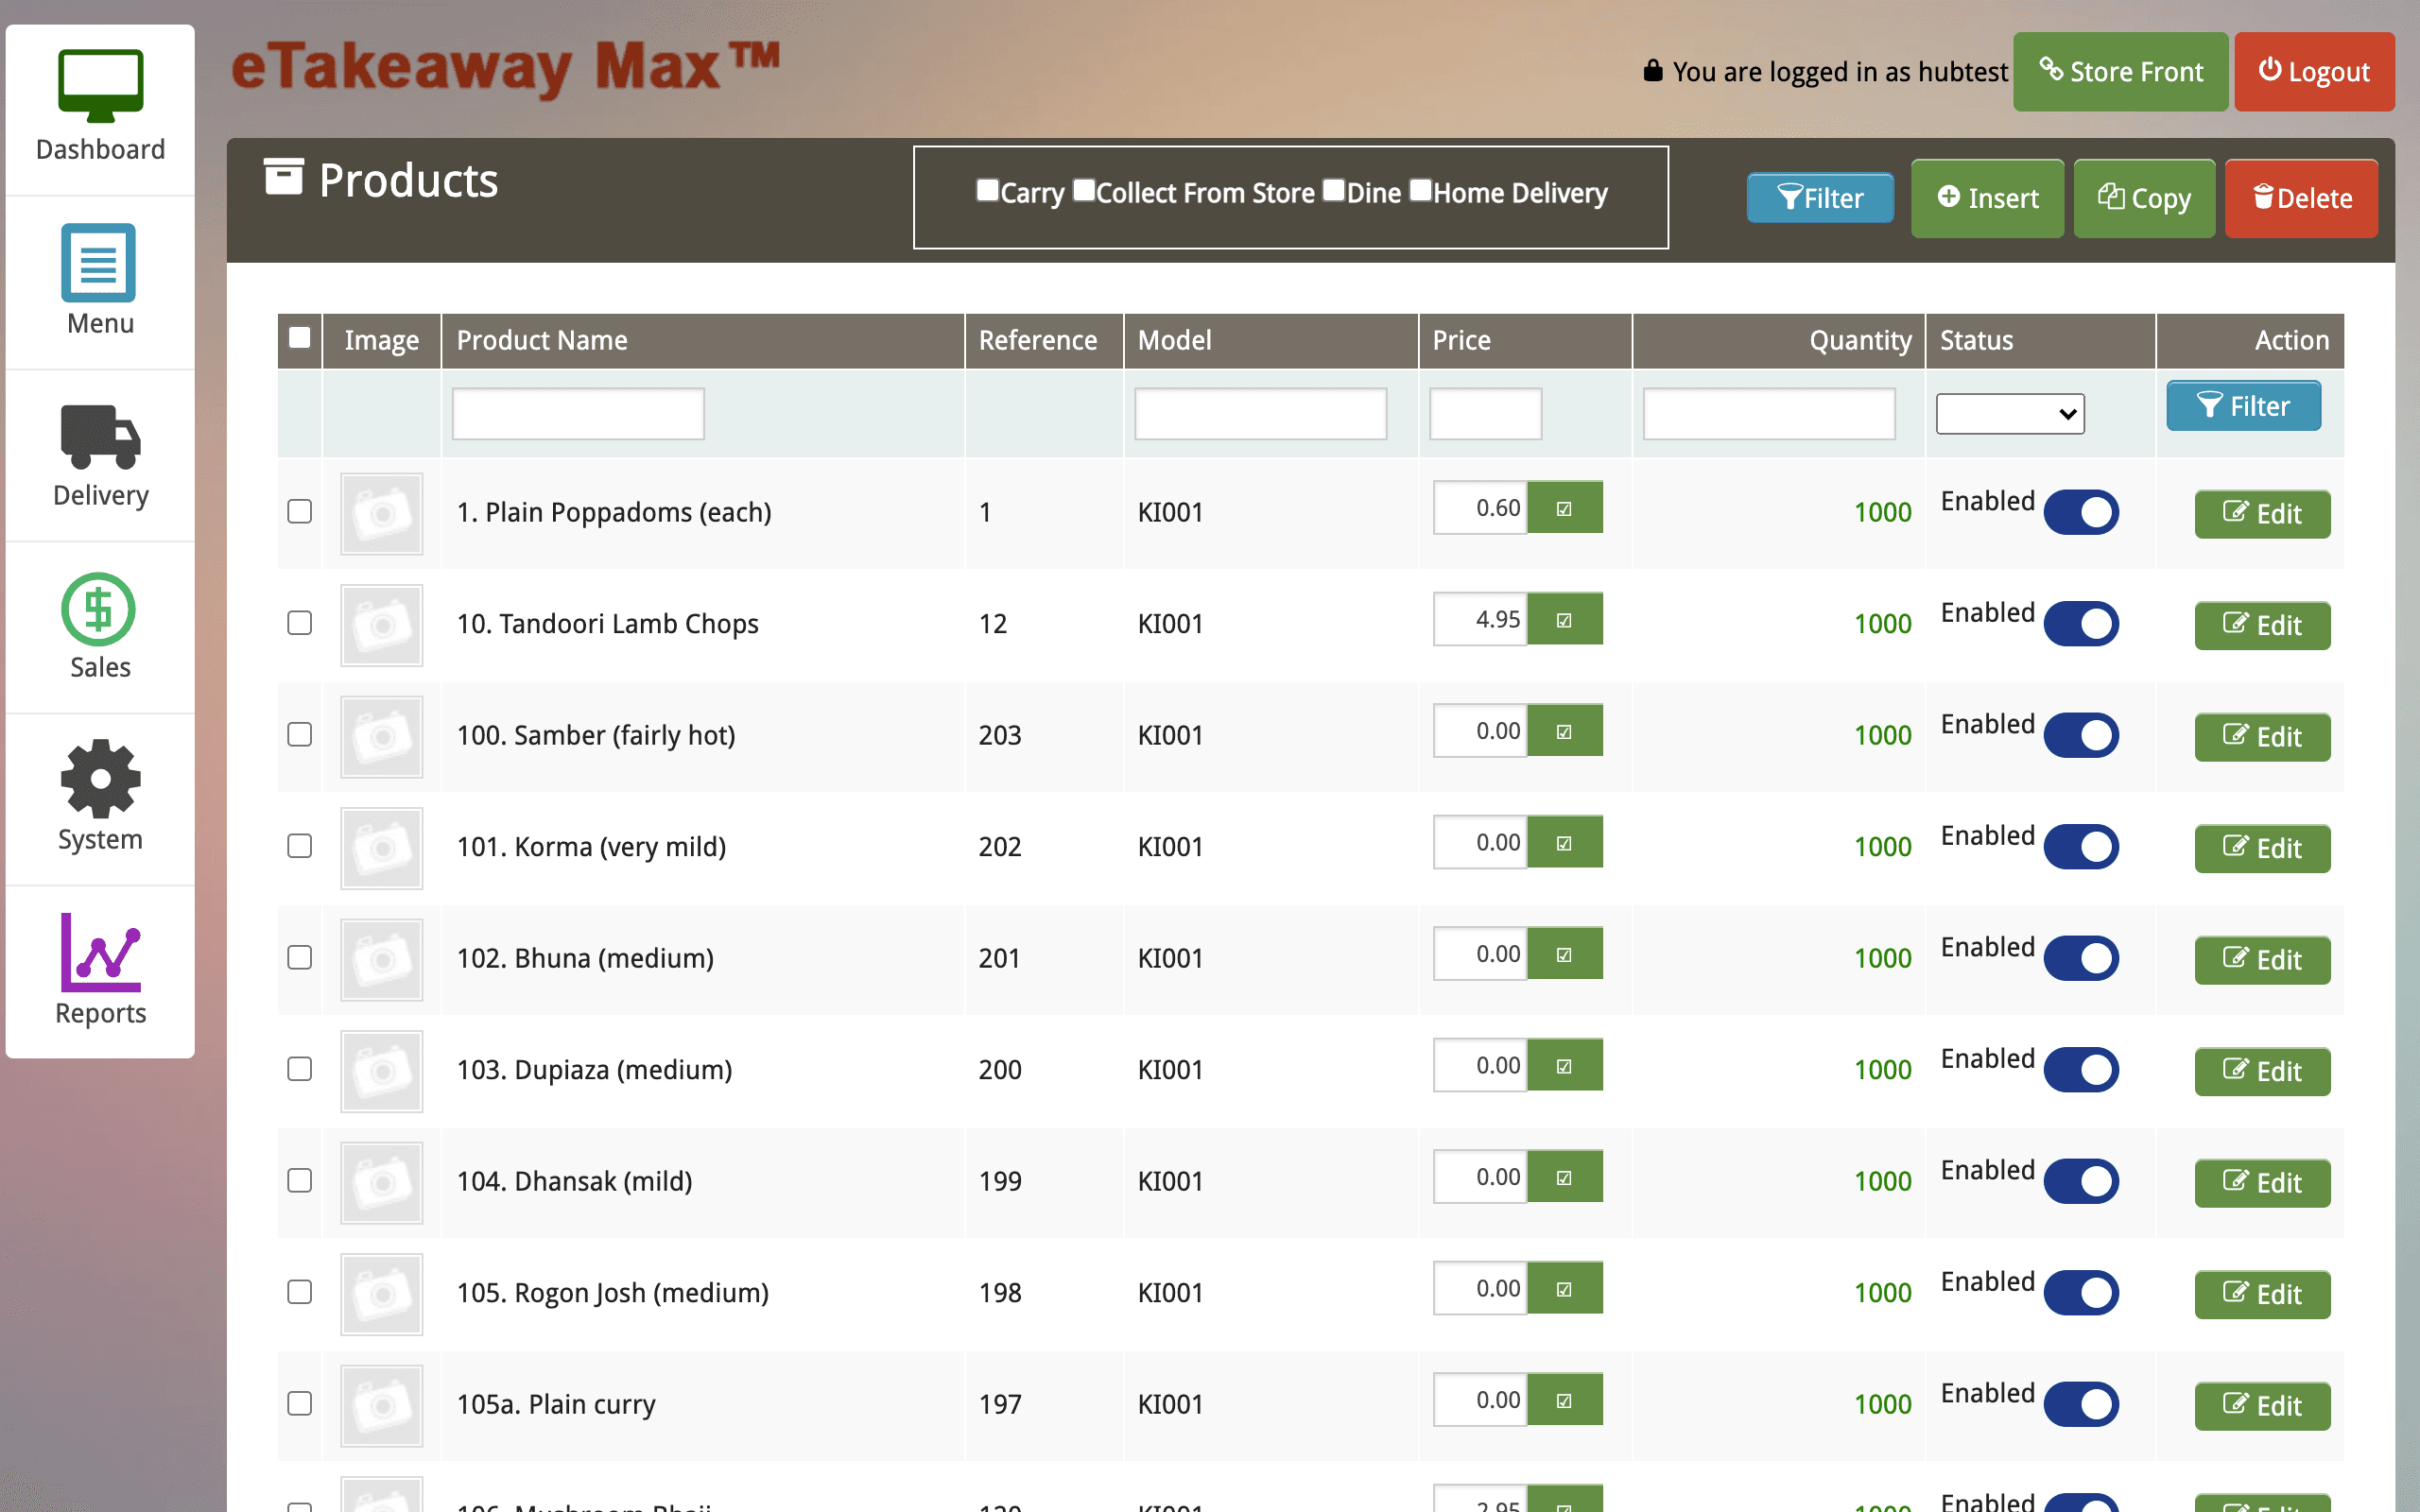 eTakeaway Max products page for store managers